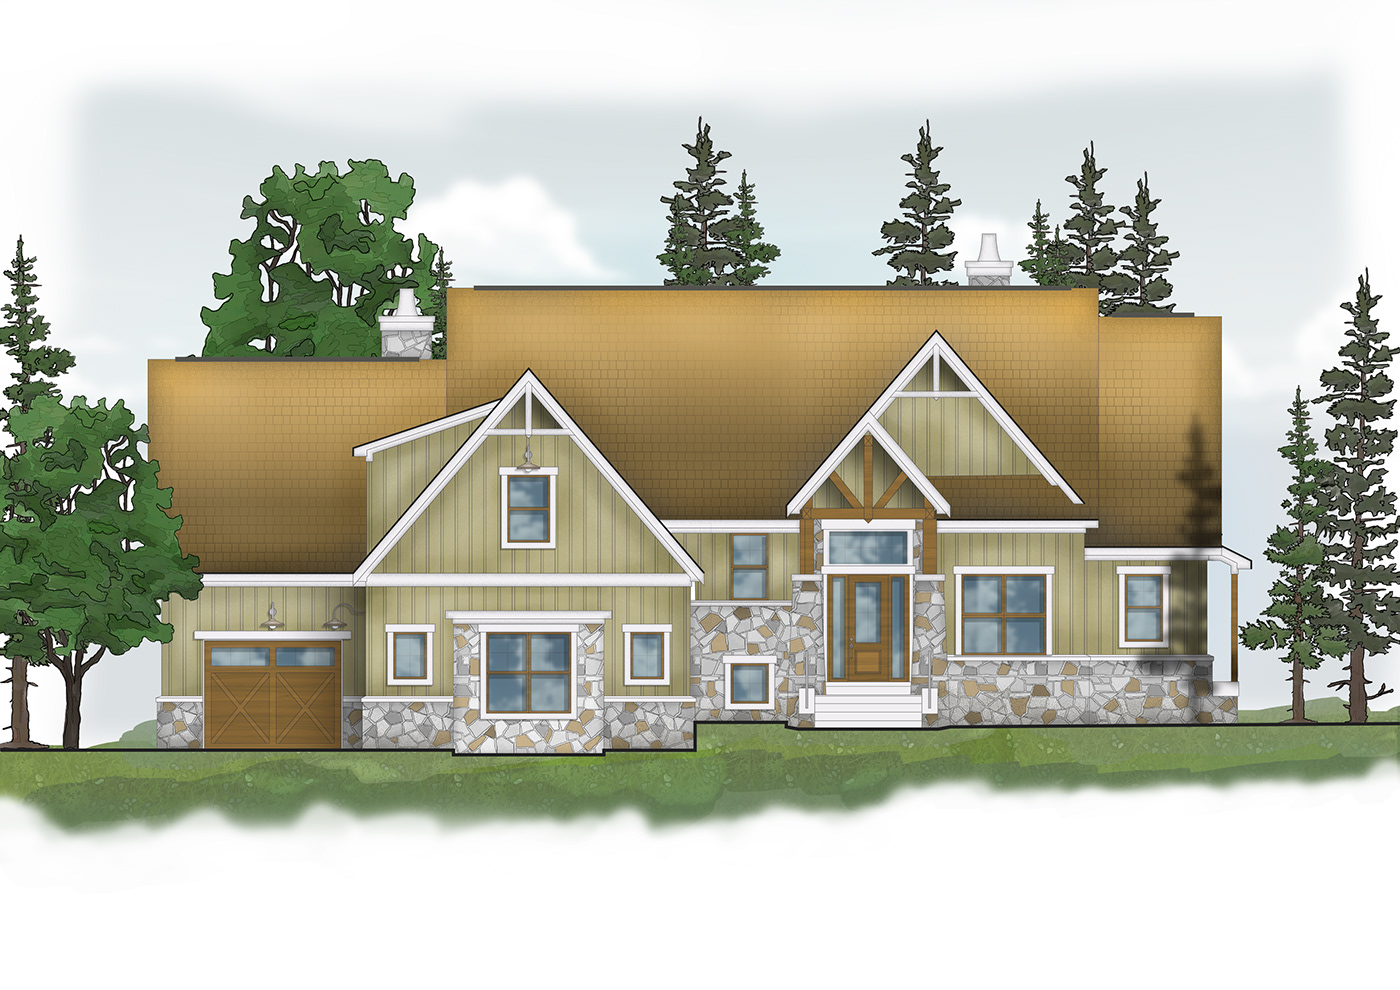 Elevation Elevations rendering colored